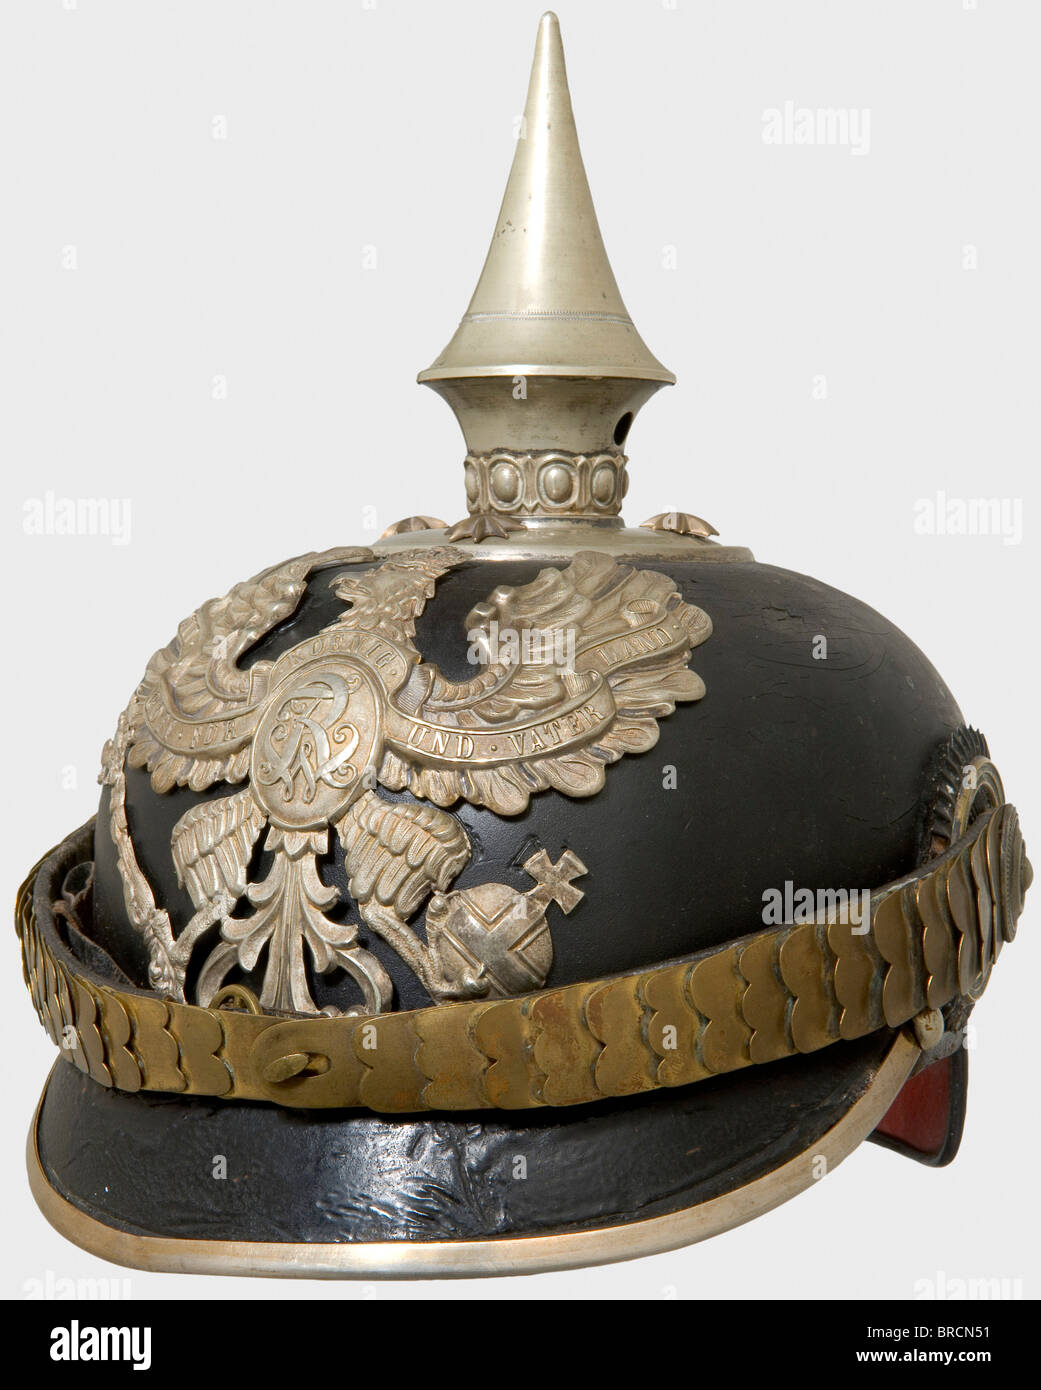 A helmet for officers, of the Pioneer Battalion Prince Radziwell (East Prussian) No. 1 Leather helmet body with silver fittings, old pattern grenadier eagle. Flat tombac chinscales, non-detachable spike, officer's cockades, brown silk liner. Varnished surface is dull and somewhat cracked. A rare helmet, worn only by a single Battalion. historic, historical, 19th century, Prussian, Prussia, German, Germany, militaria, military, object, objects, stills, clipping, clippings, cut out, cut-out, cut-outs, Stock Photo